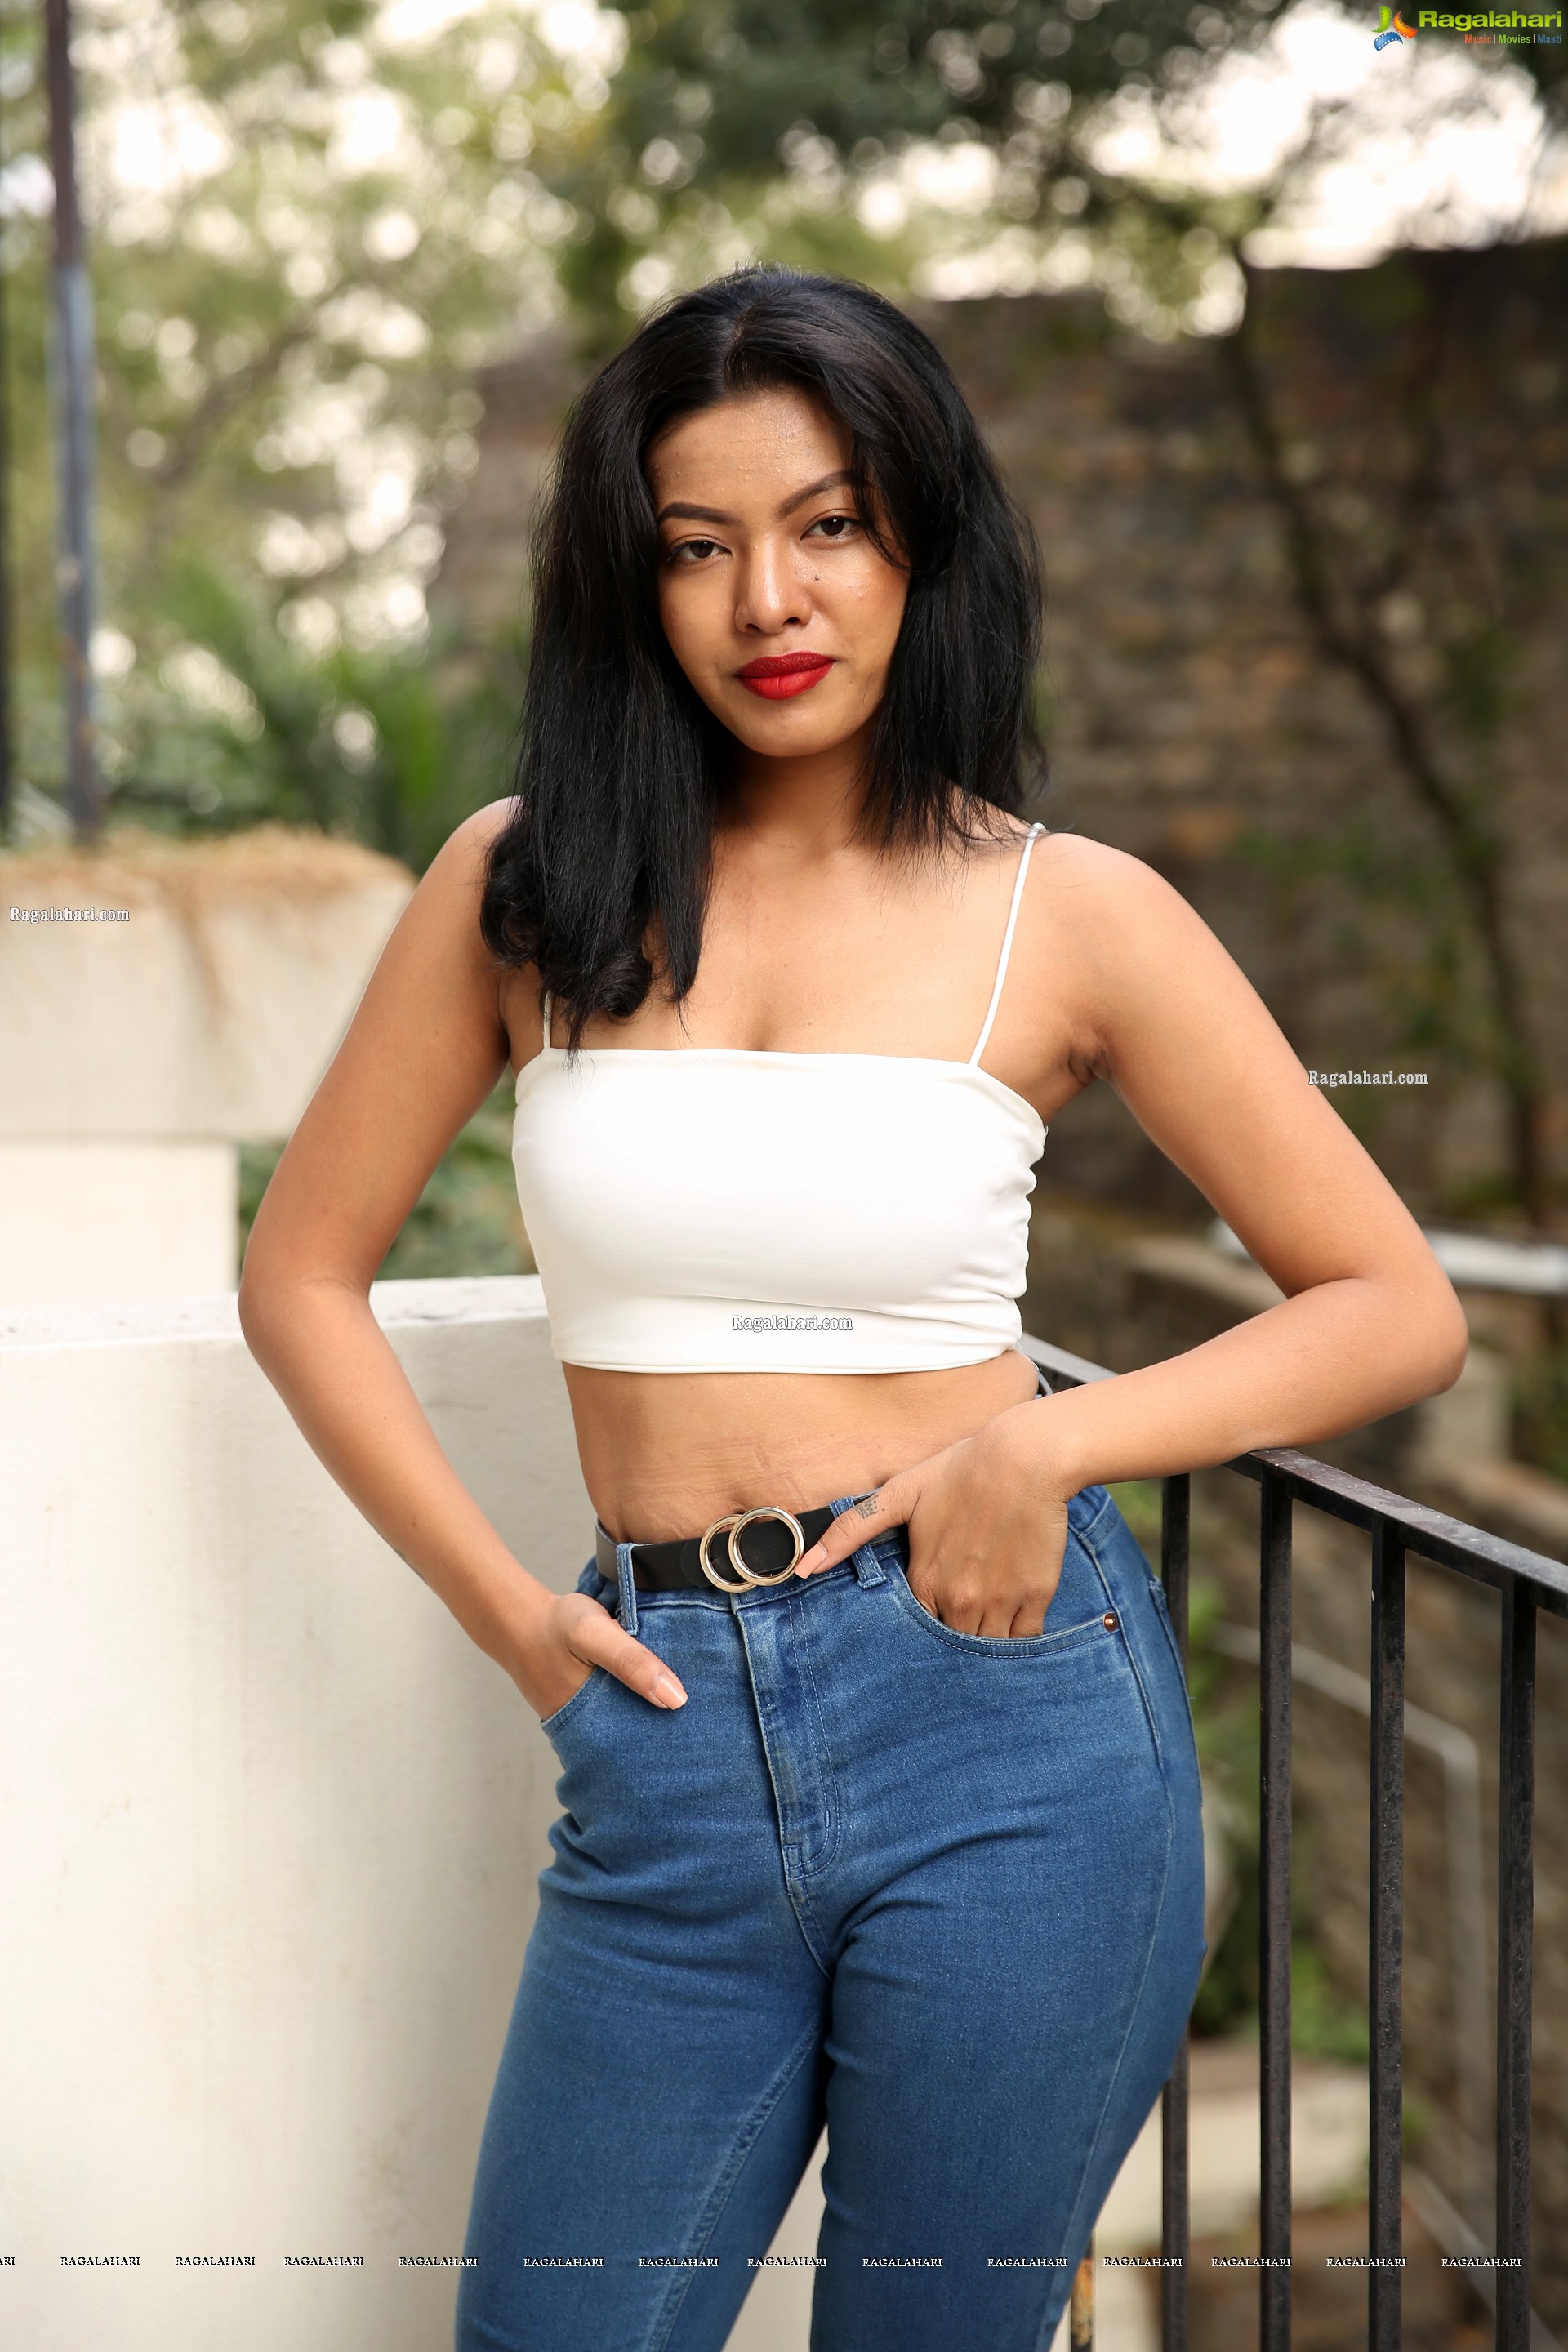 Kavita Mahatho in White Spaghetti Strap Crop Top and Jeans, HD Photo Gallery